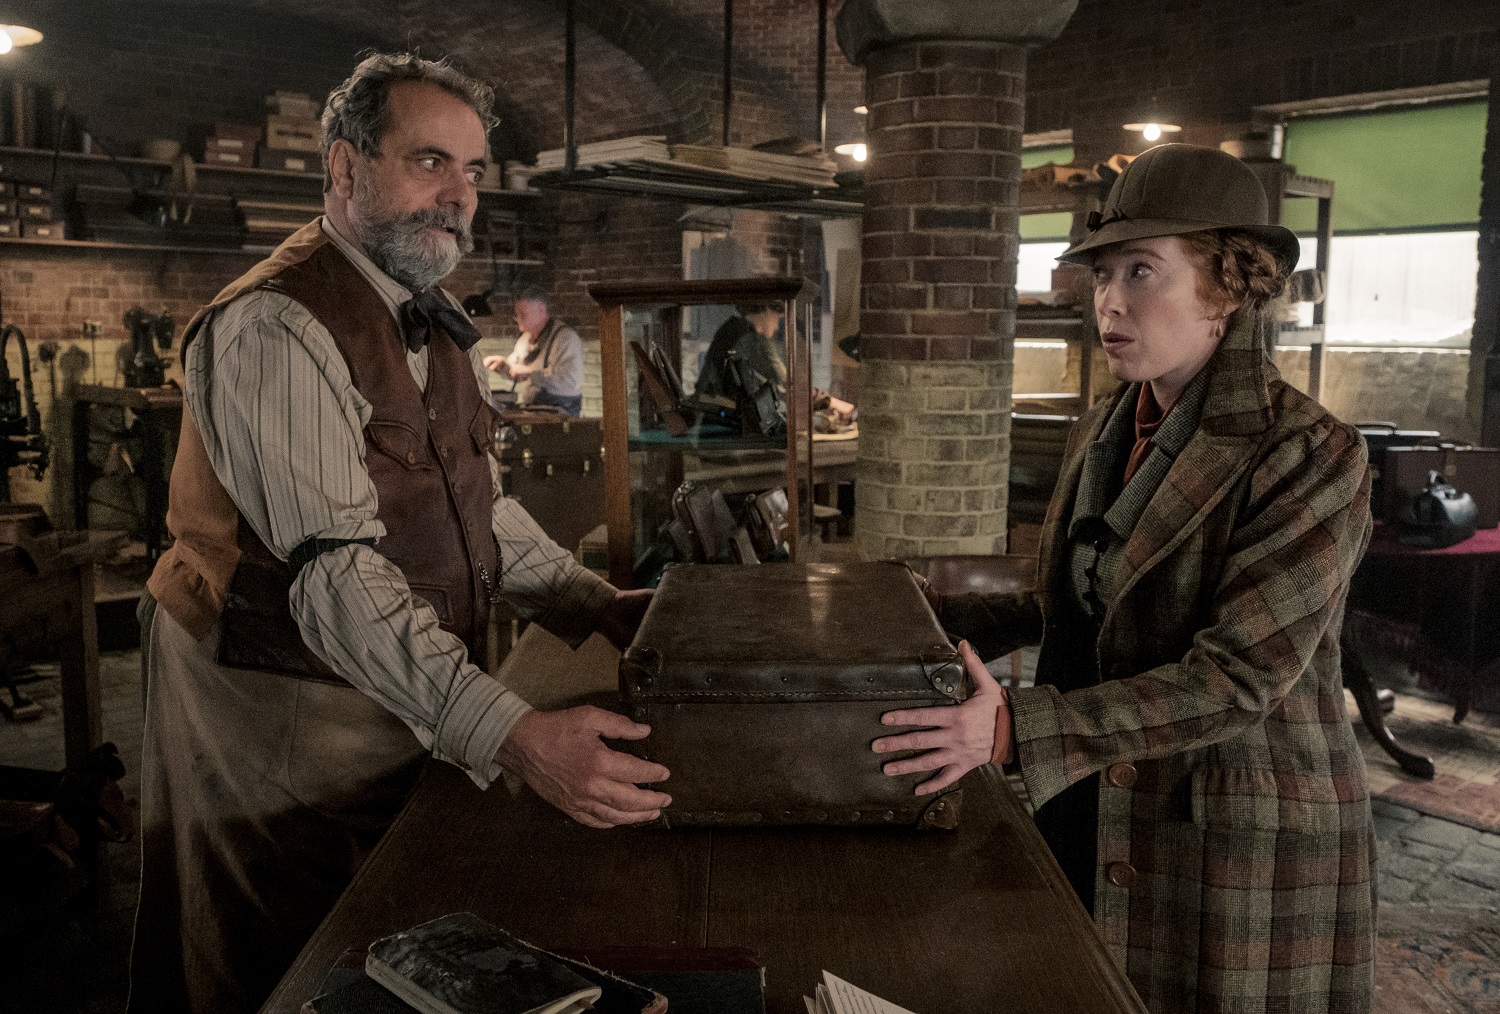 (L-R) MATTHIAS BRENNER as Otto and VICTORIA YEATES as Bunty in Warner Bros. Pictures' fantasy adventure "FANTASTIC BEASTS: THE SECRETS OF DUMBLEDORE,” a Warner Bros. Pictures release.